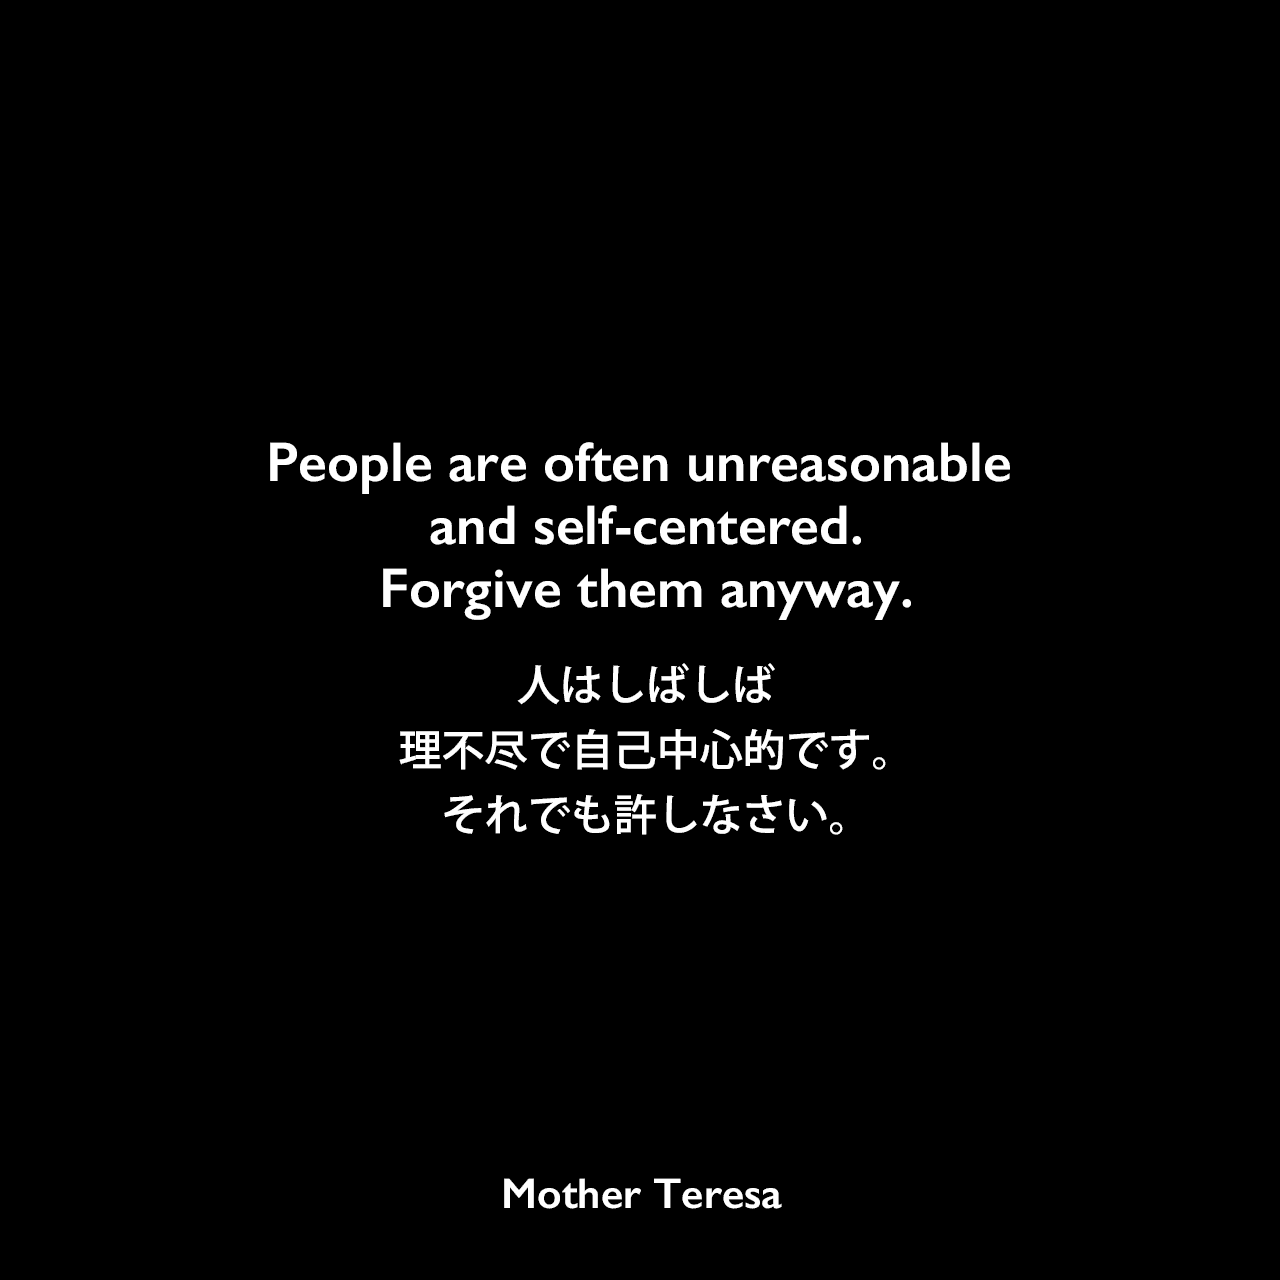 People are often unreasonable and self-centered.Forgive them anyway.人はしばしば理不尽で自己中心的です。それでも許しなさい。